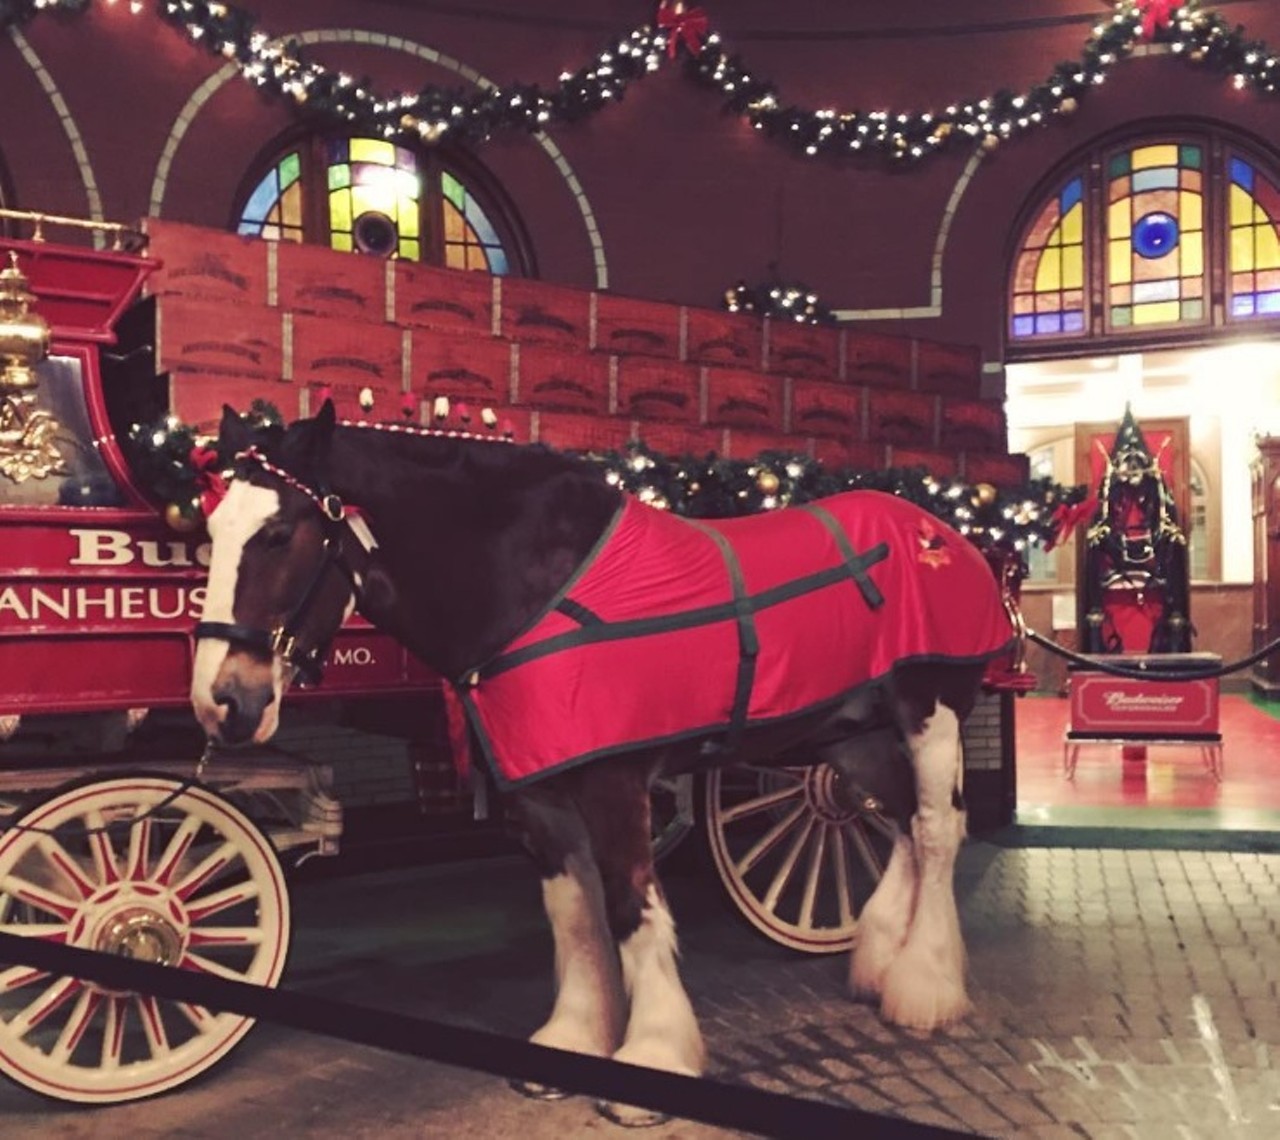 A Clydesdale at the Anheuser-Busch BreweryThey're the hero of all your favorite Super Bowl commercials, after all. Photo courtesy of Instagram / jess.buse.